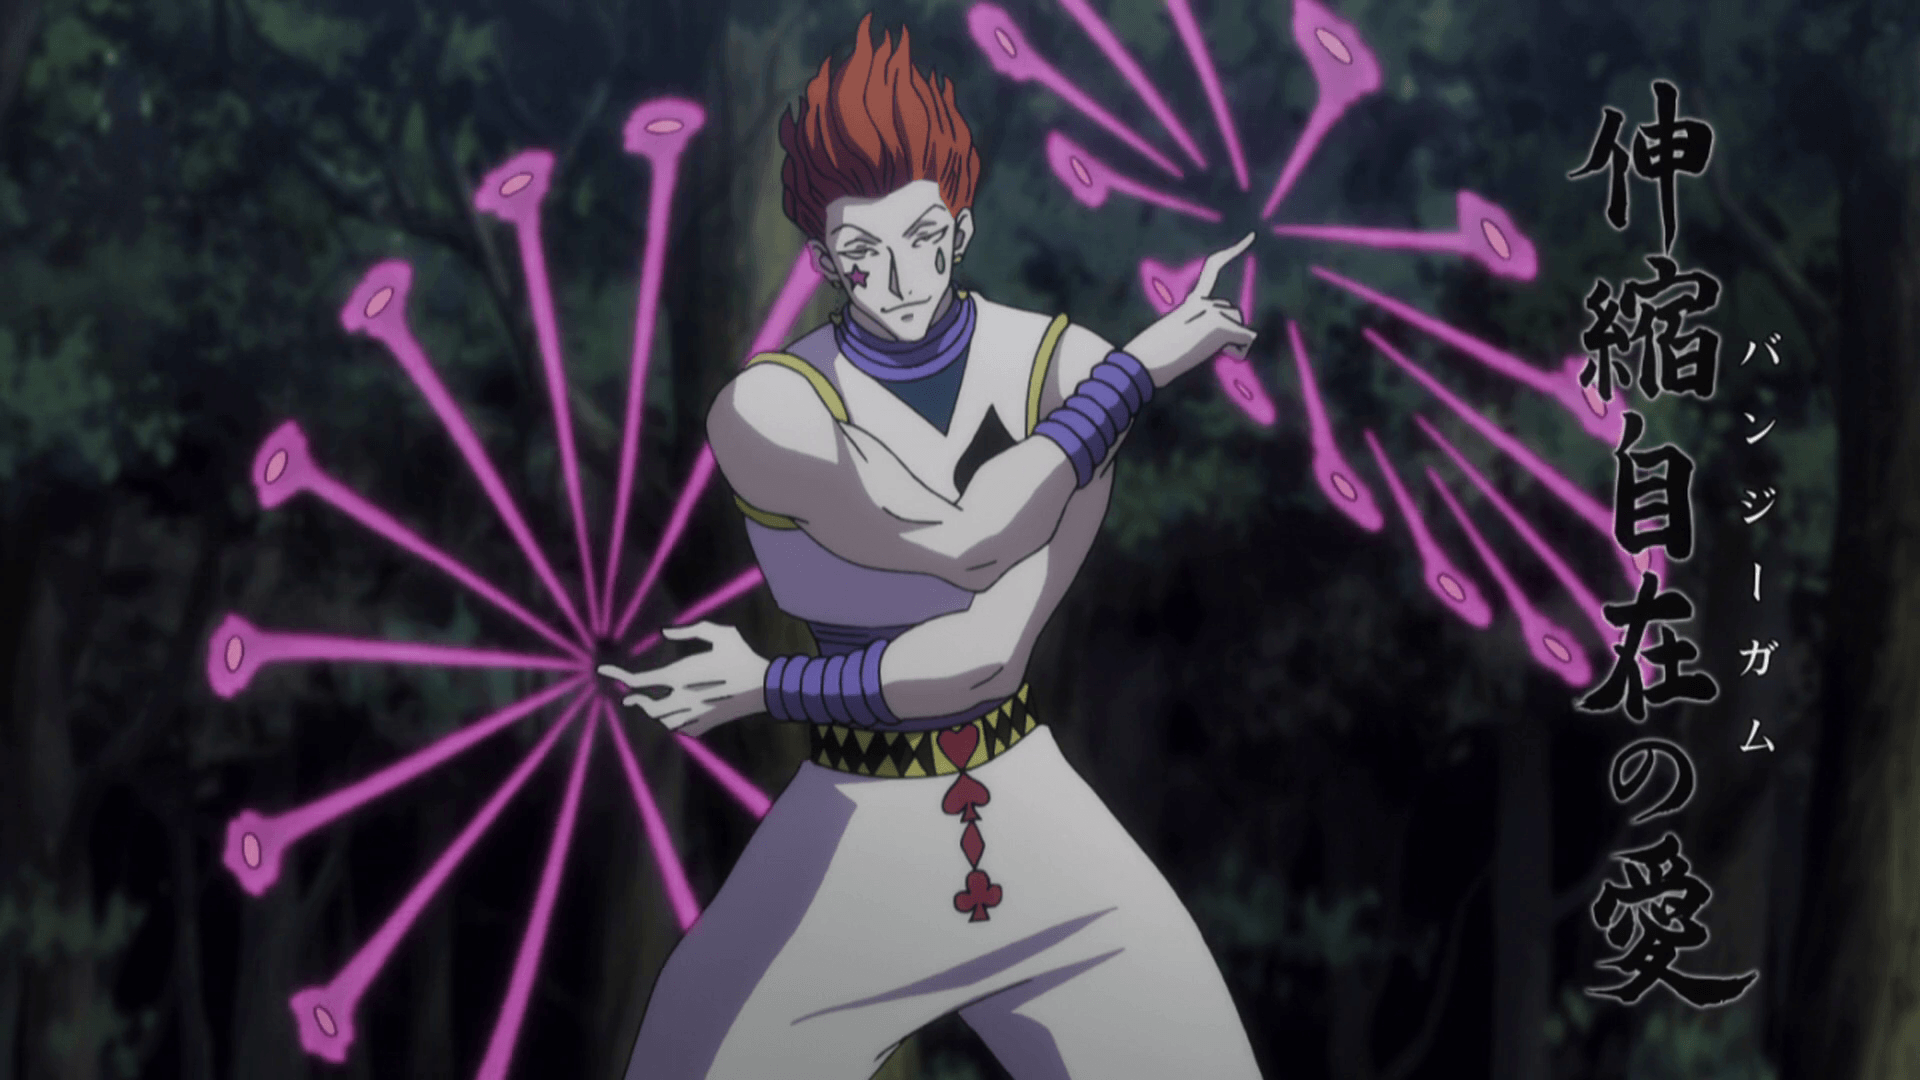 image about Hisoka. Chibi, Hair down and Hunters